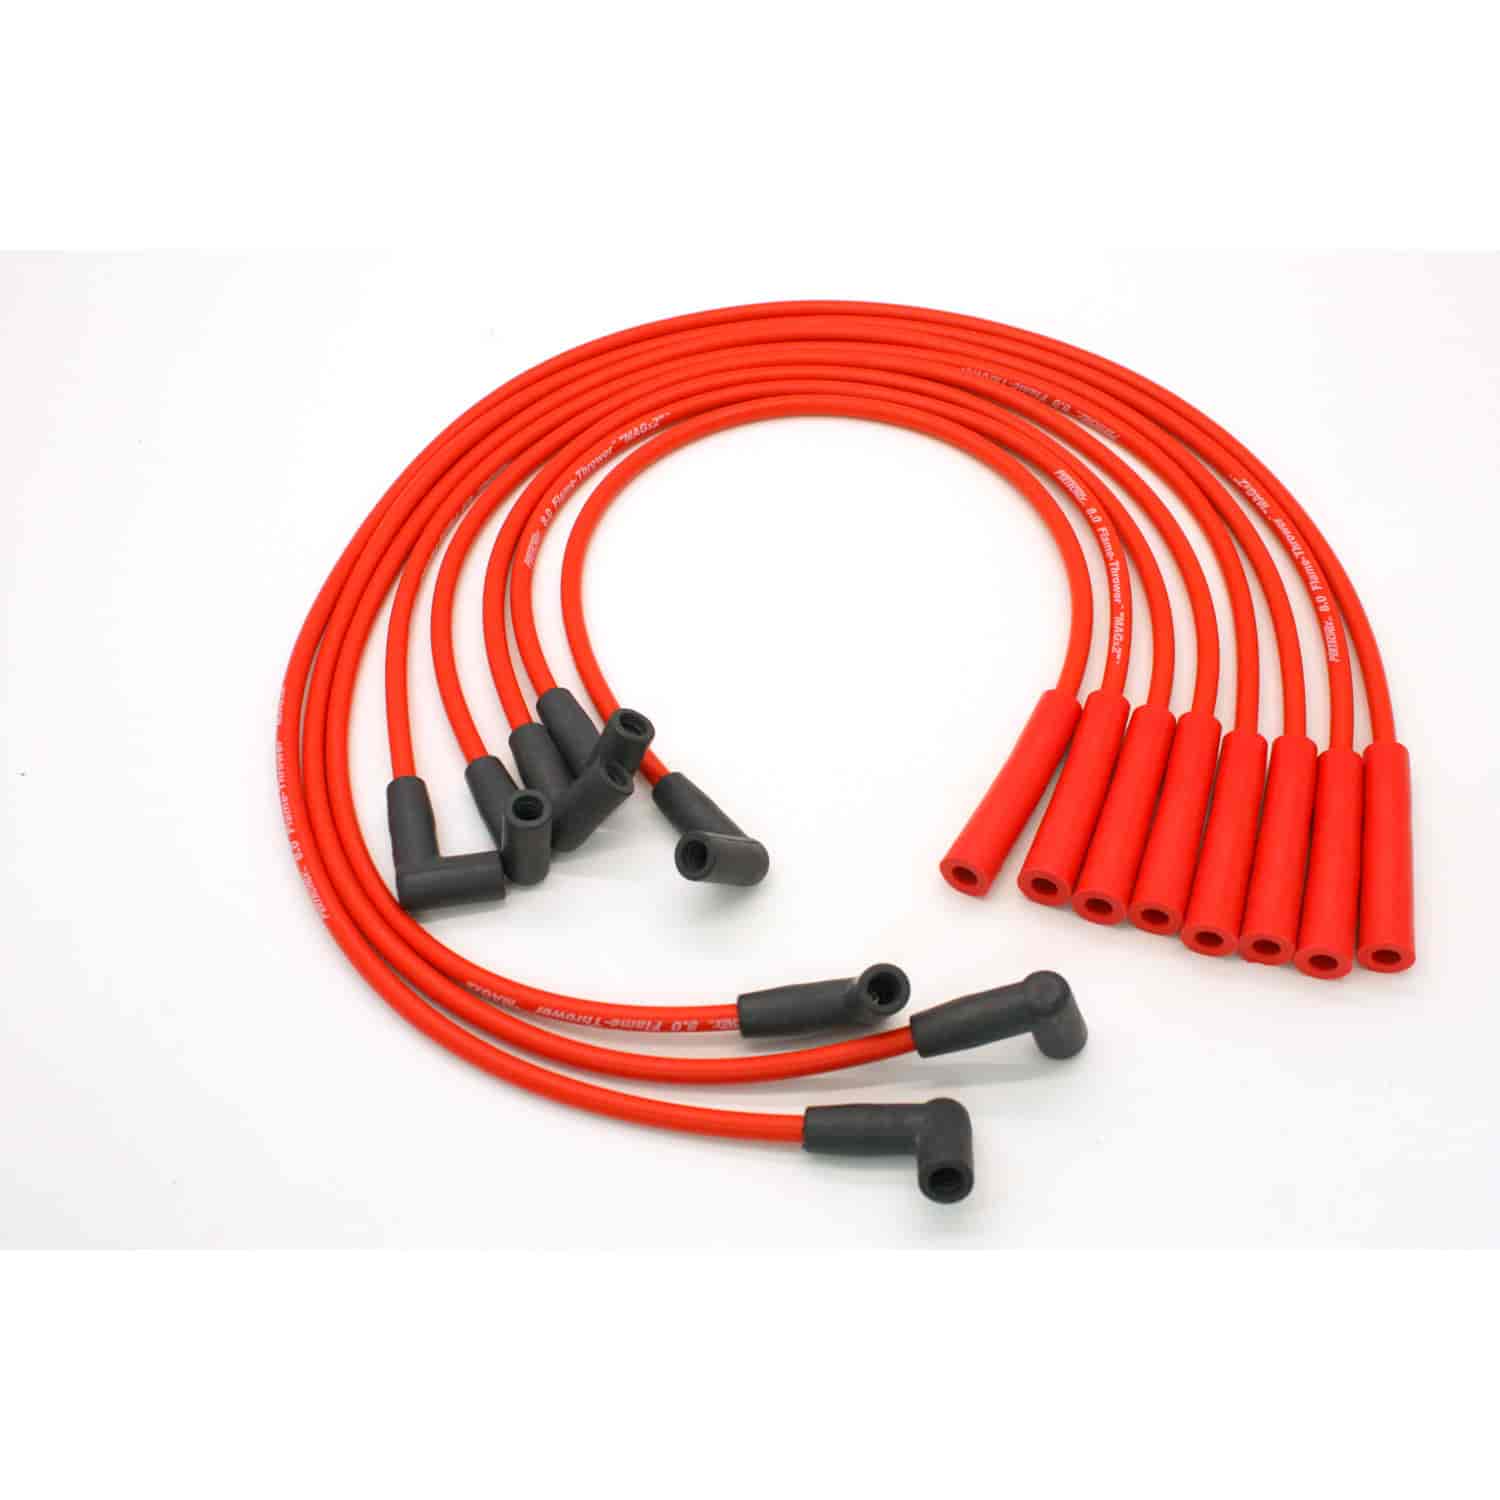 Flame-Thrower 8mm MAGx2 Spark Plug Wires 1986-87 Chevy Impala 305